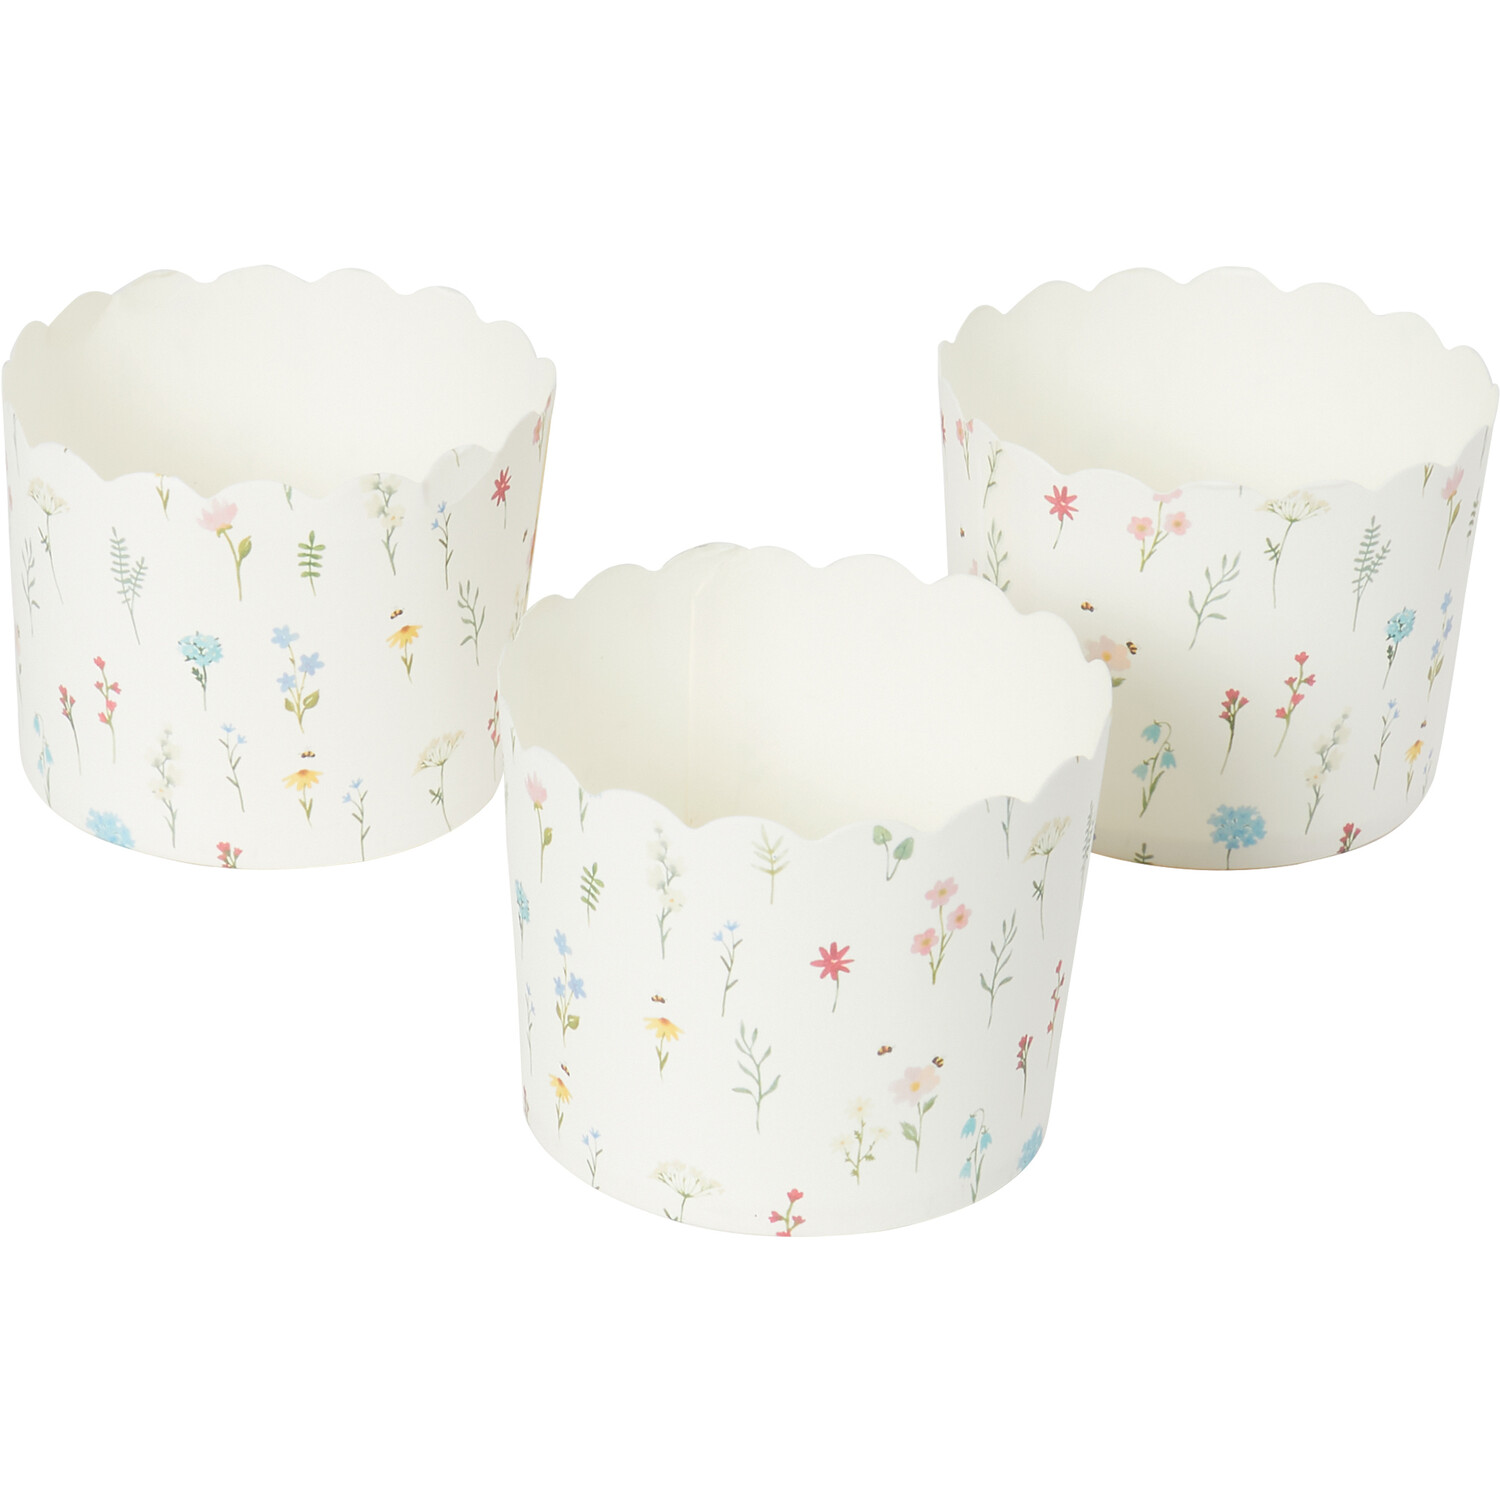 Pack of 24 Flower Market Muffin Cases - White Image 3